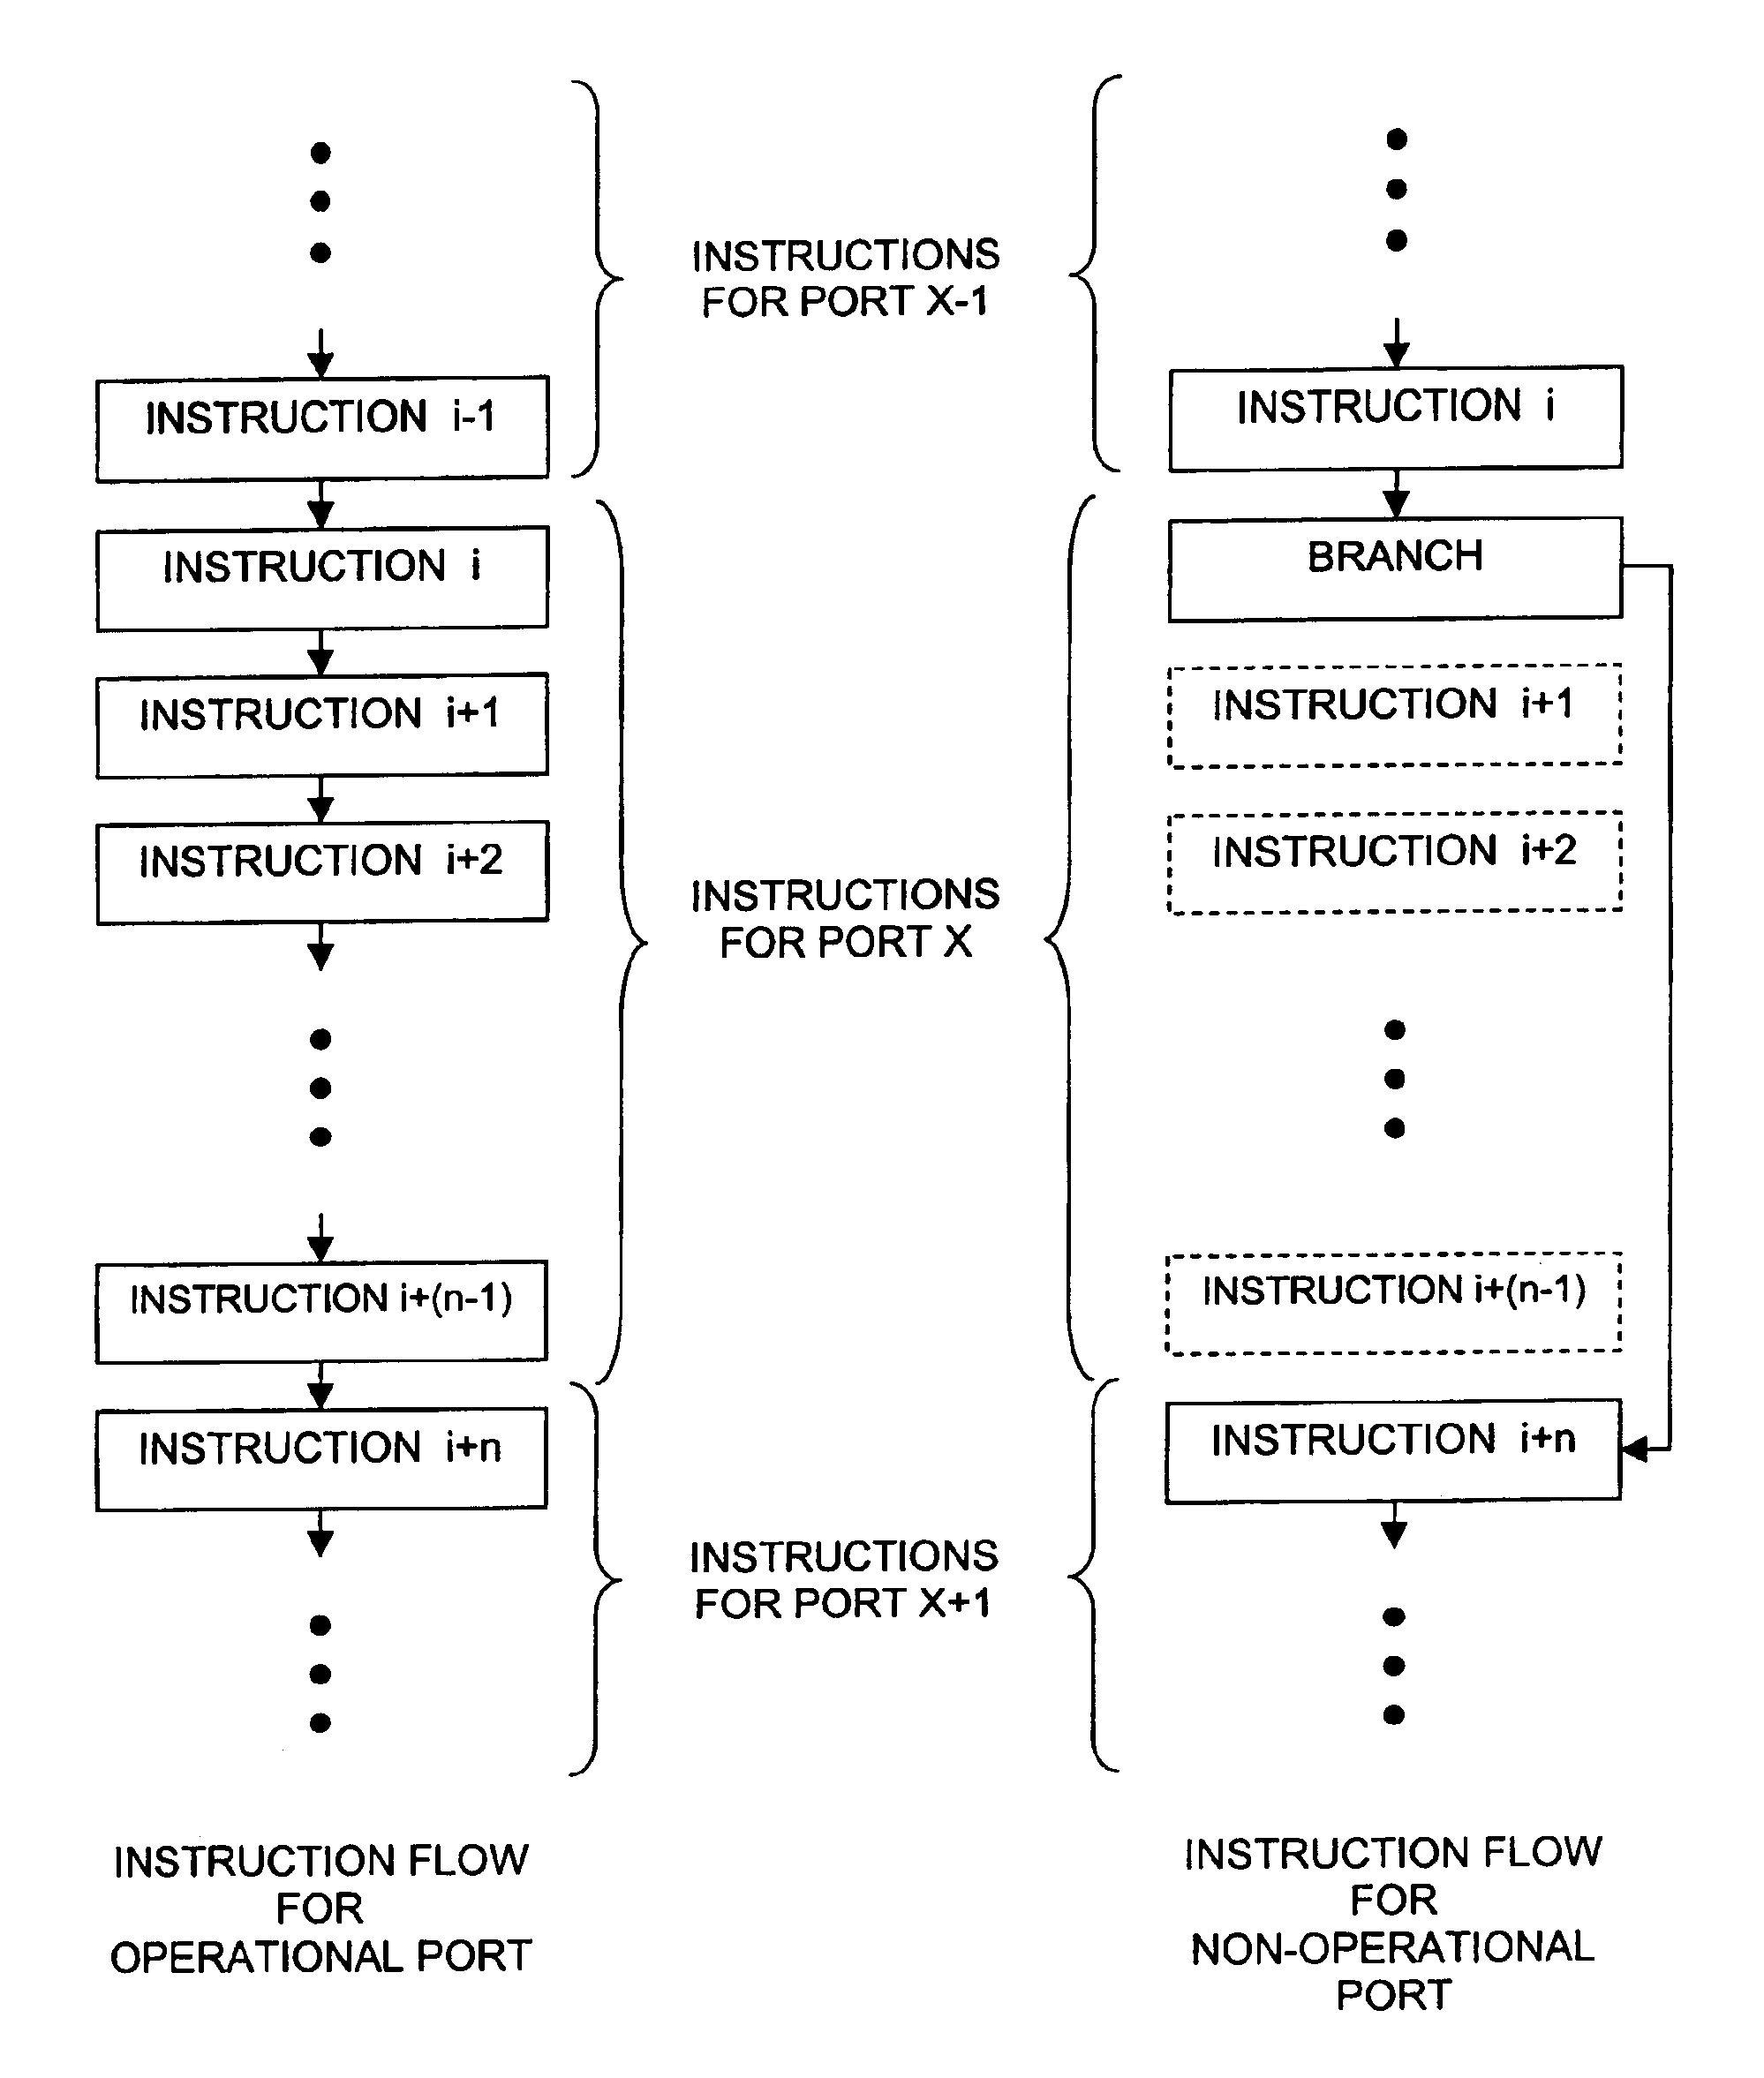 Method and system for decreasing routing latency for switching platforms with variable configuration